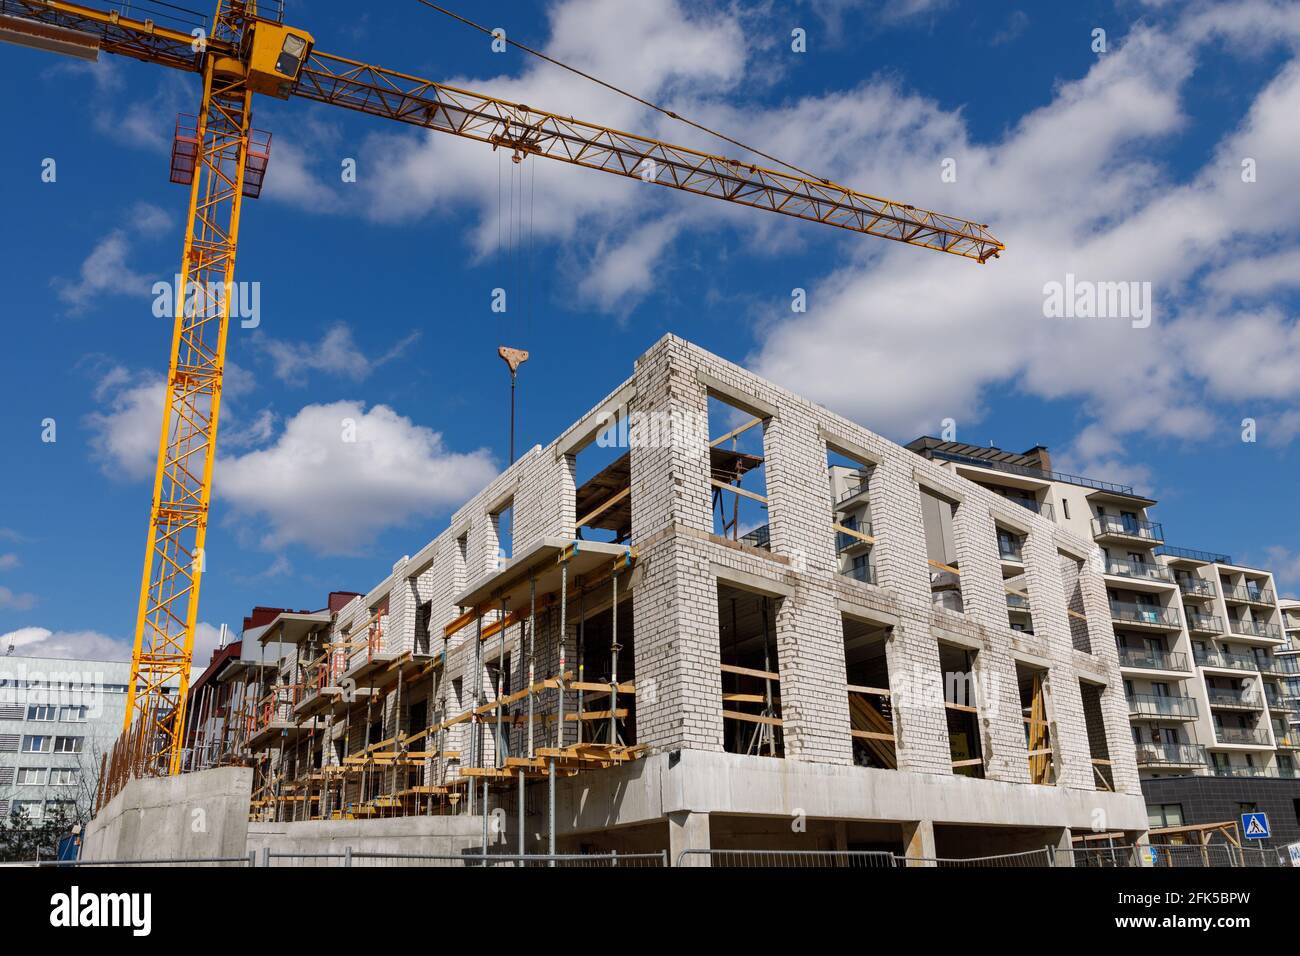 Unfinished construction of a multi-store residential brick building and a tall crane. The photo is taken in Vilnius, Lithuania. Stock Photo